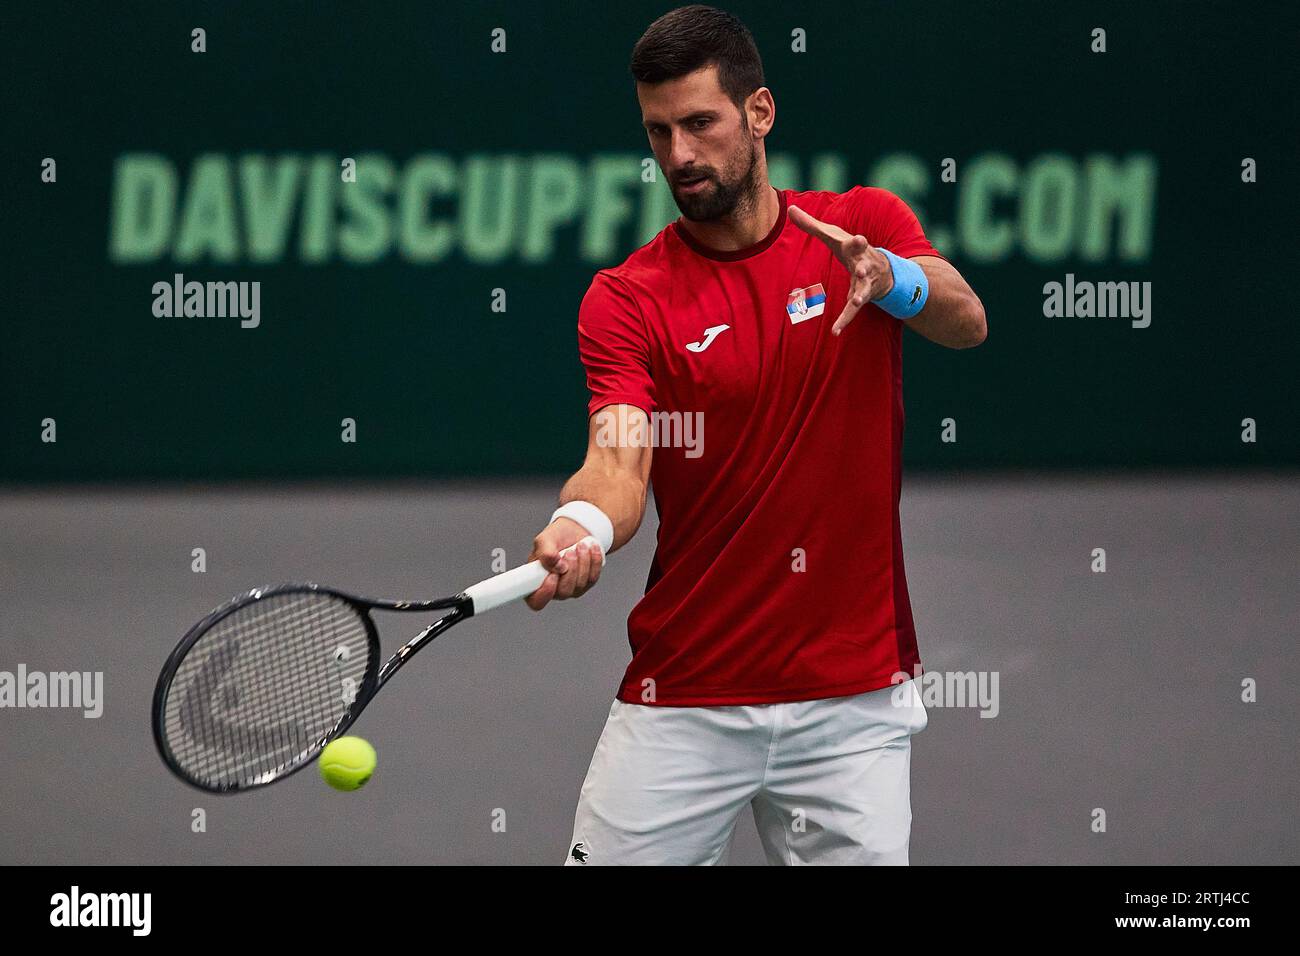 Novak Djokovic of Serbia in a practice session before the Davis Cup Group Stage 2023 Valencia match between Spain and Serbia